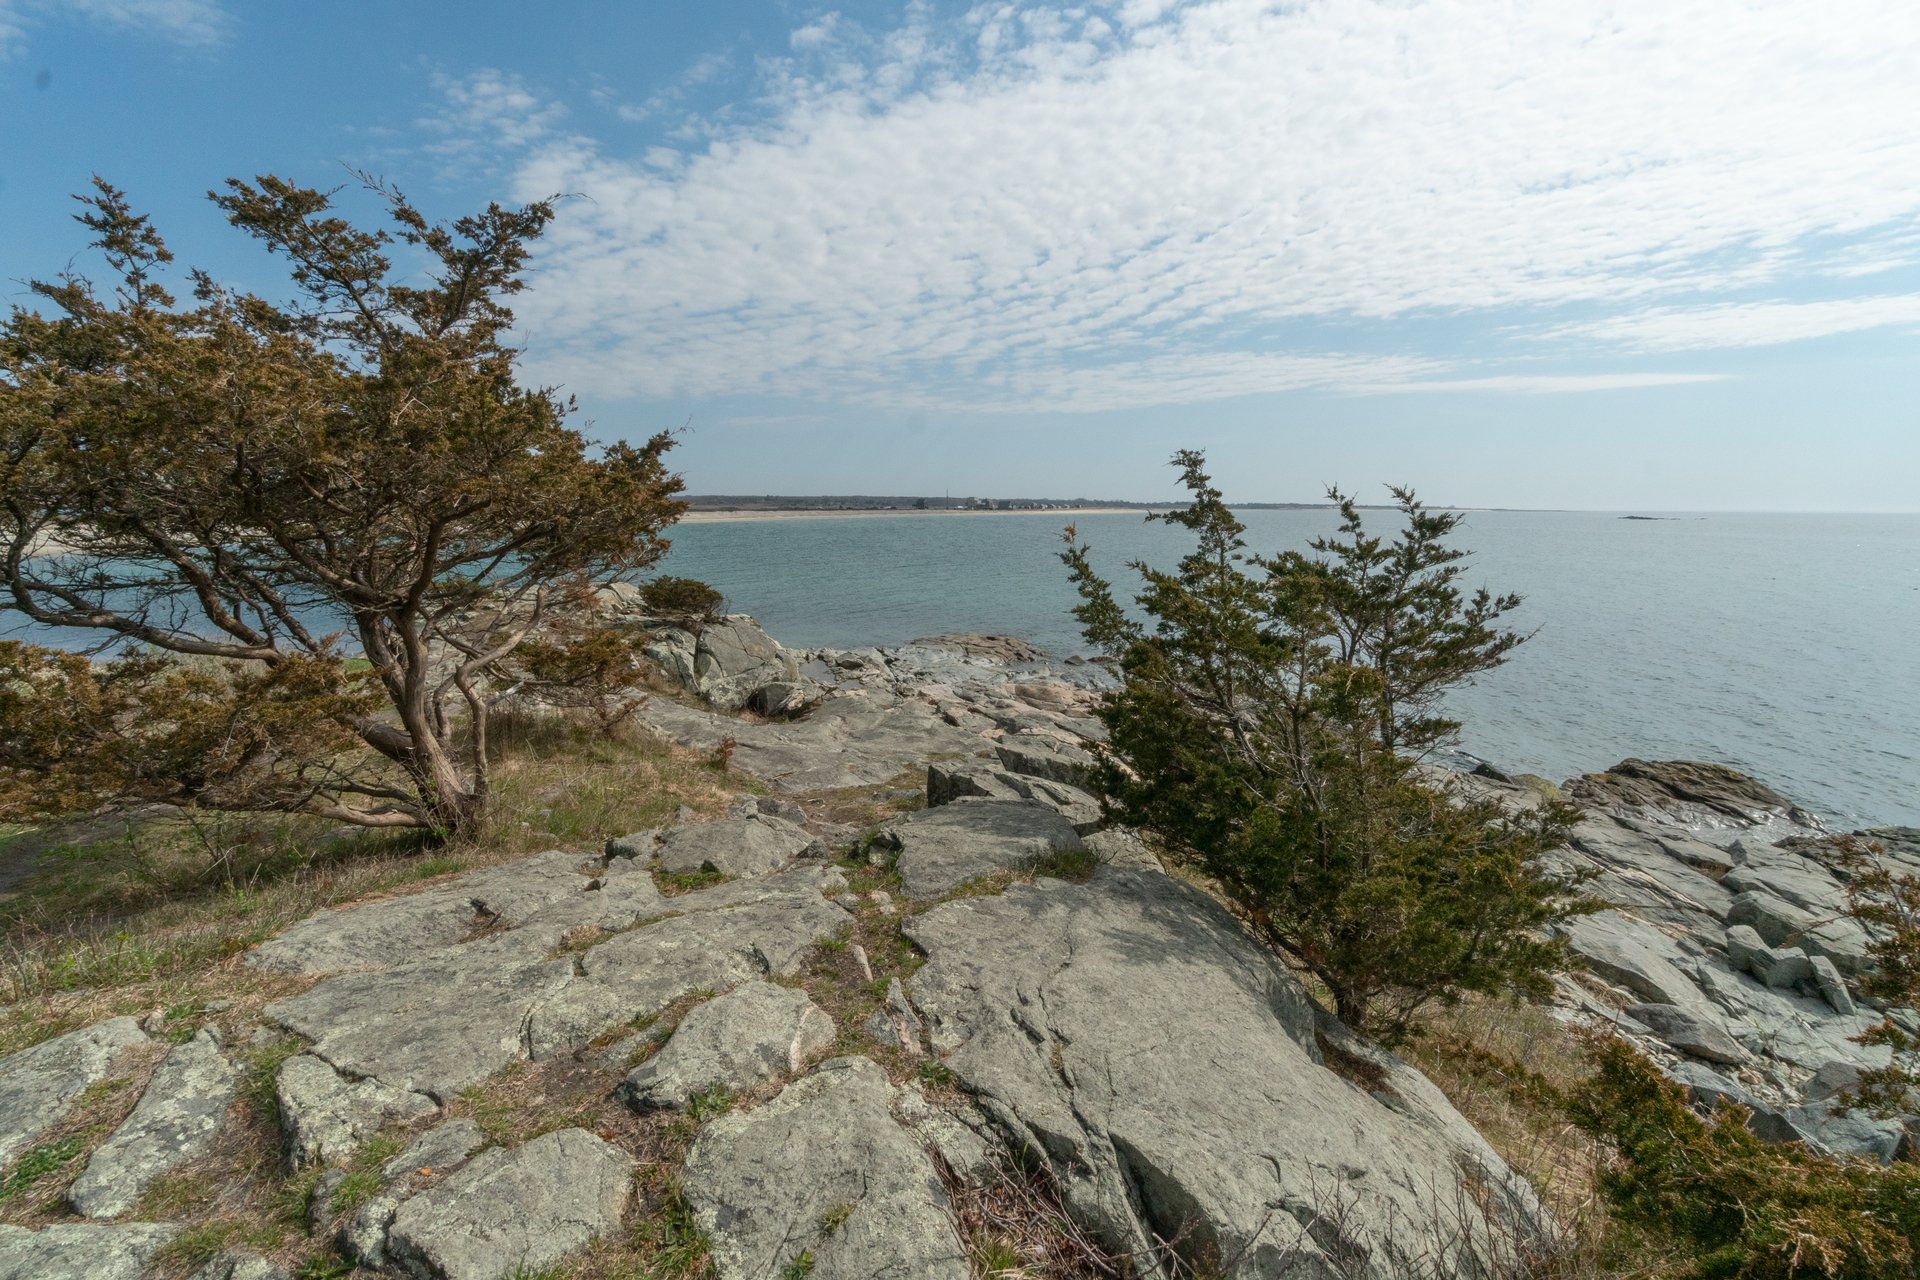 A rocky ledge with two green shrubs overlooking the shoreline. Large, sharp rocks stick out of the water.